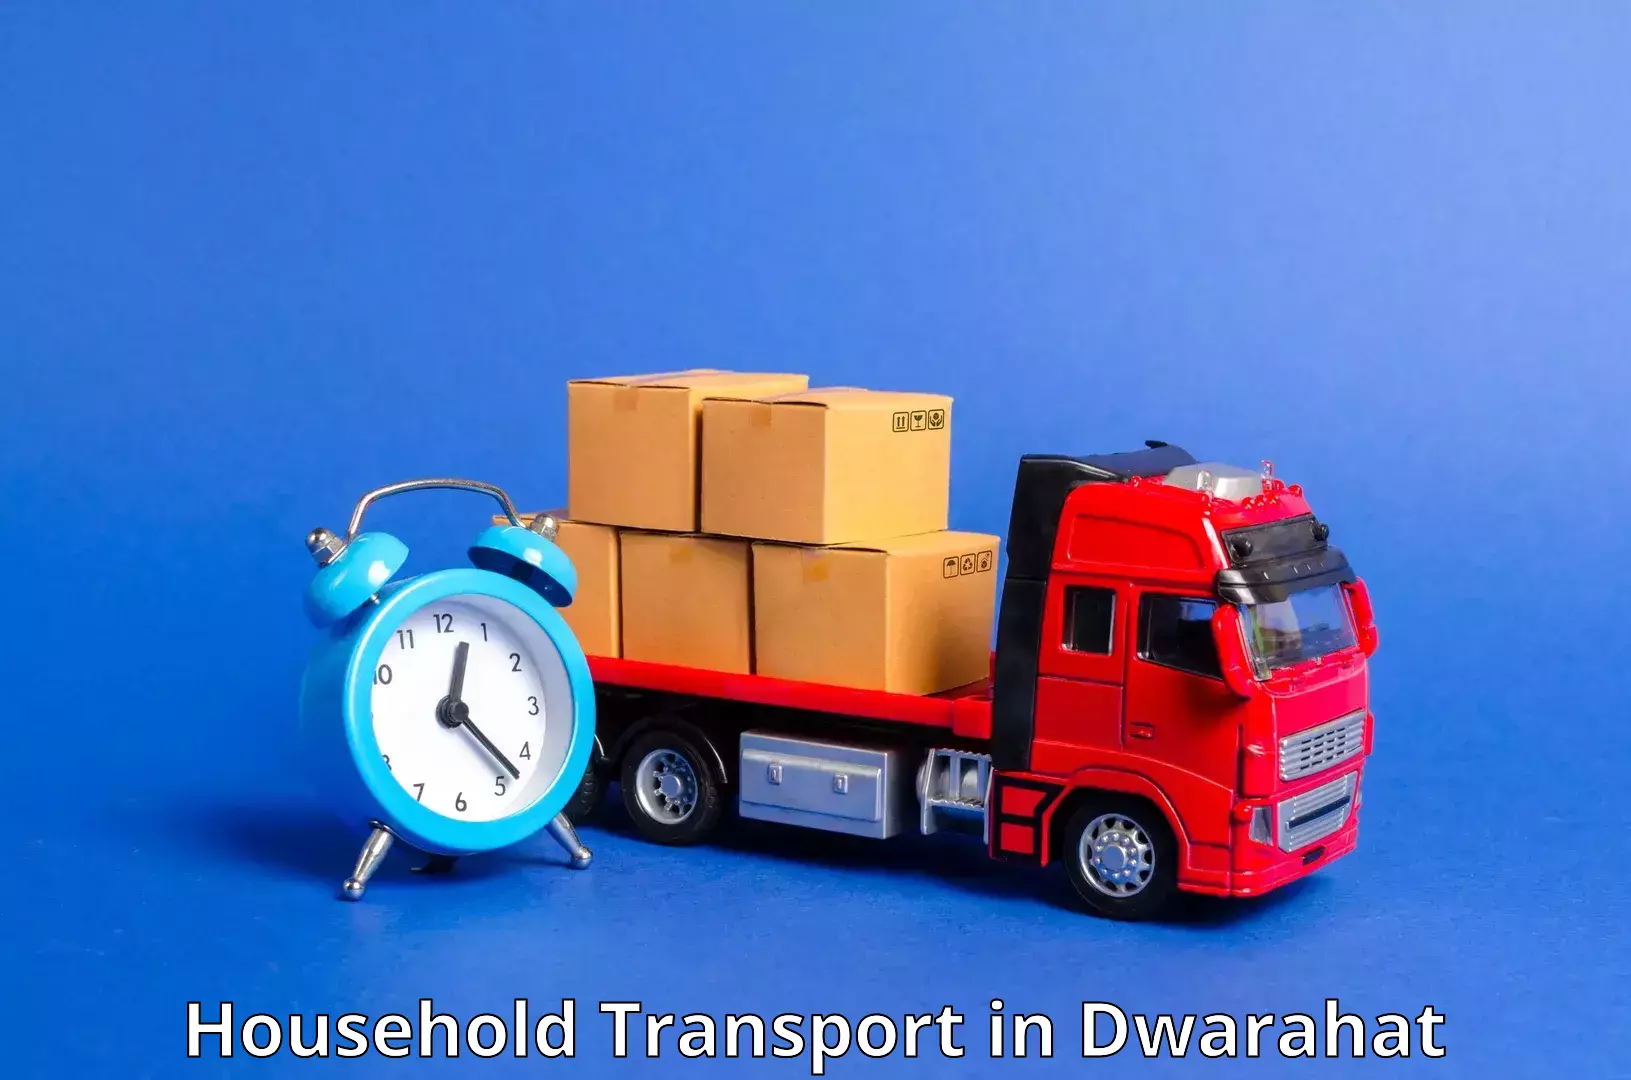 Furniture delivery service in Dwarahat